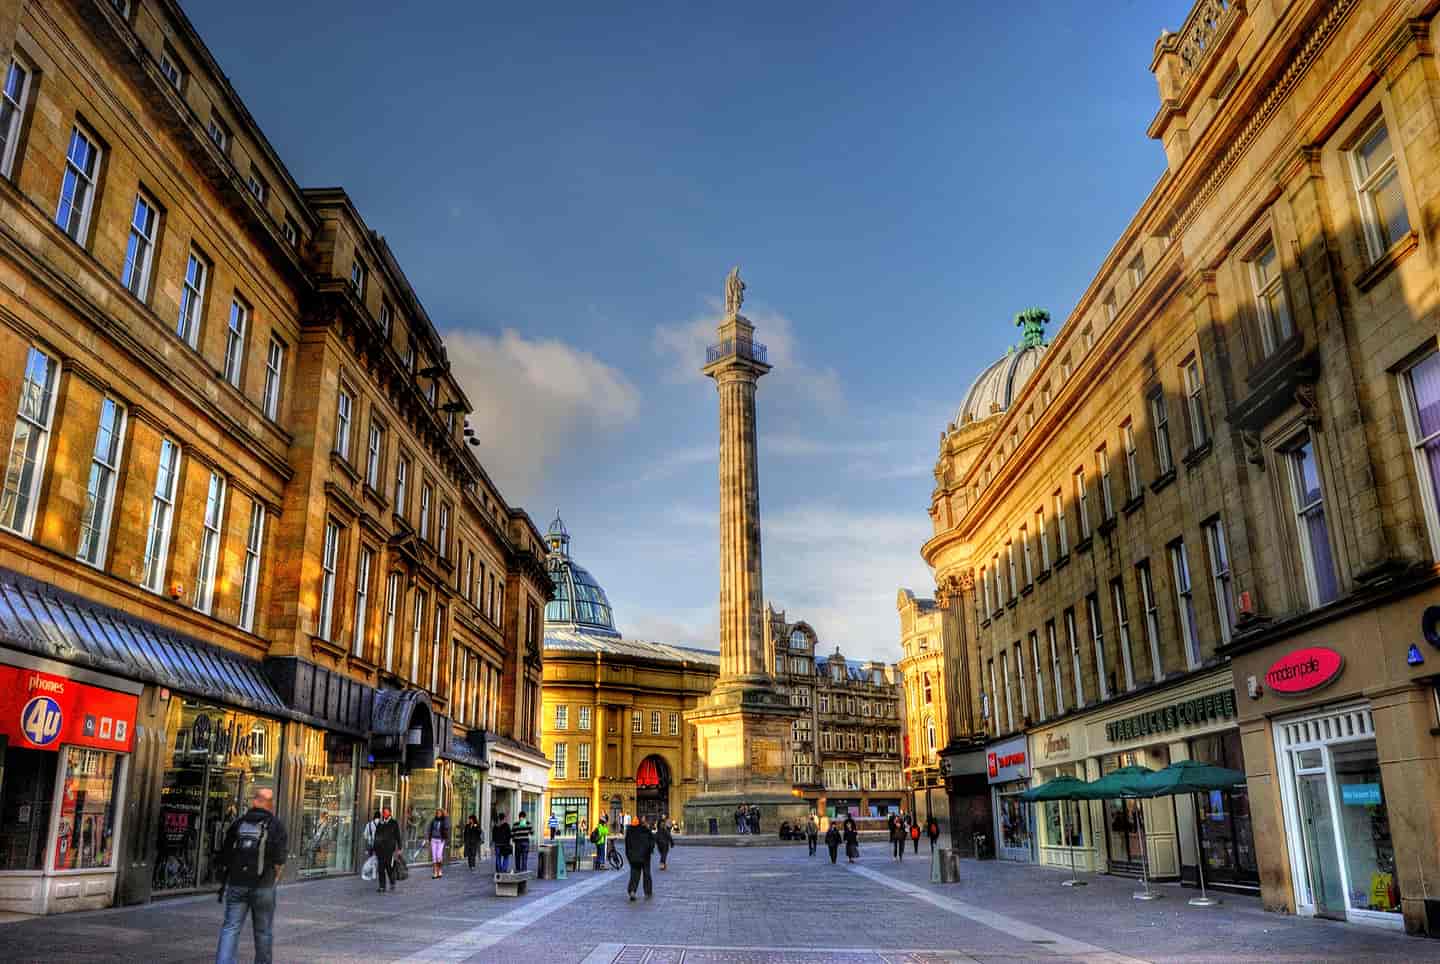 Student Accommodation in Newcastle - Grey's Monument at the metro station